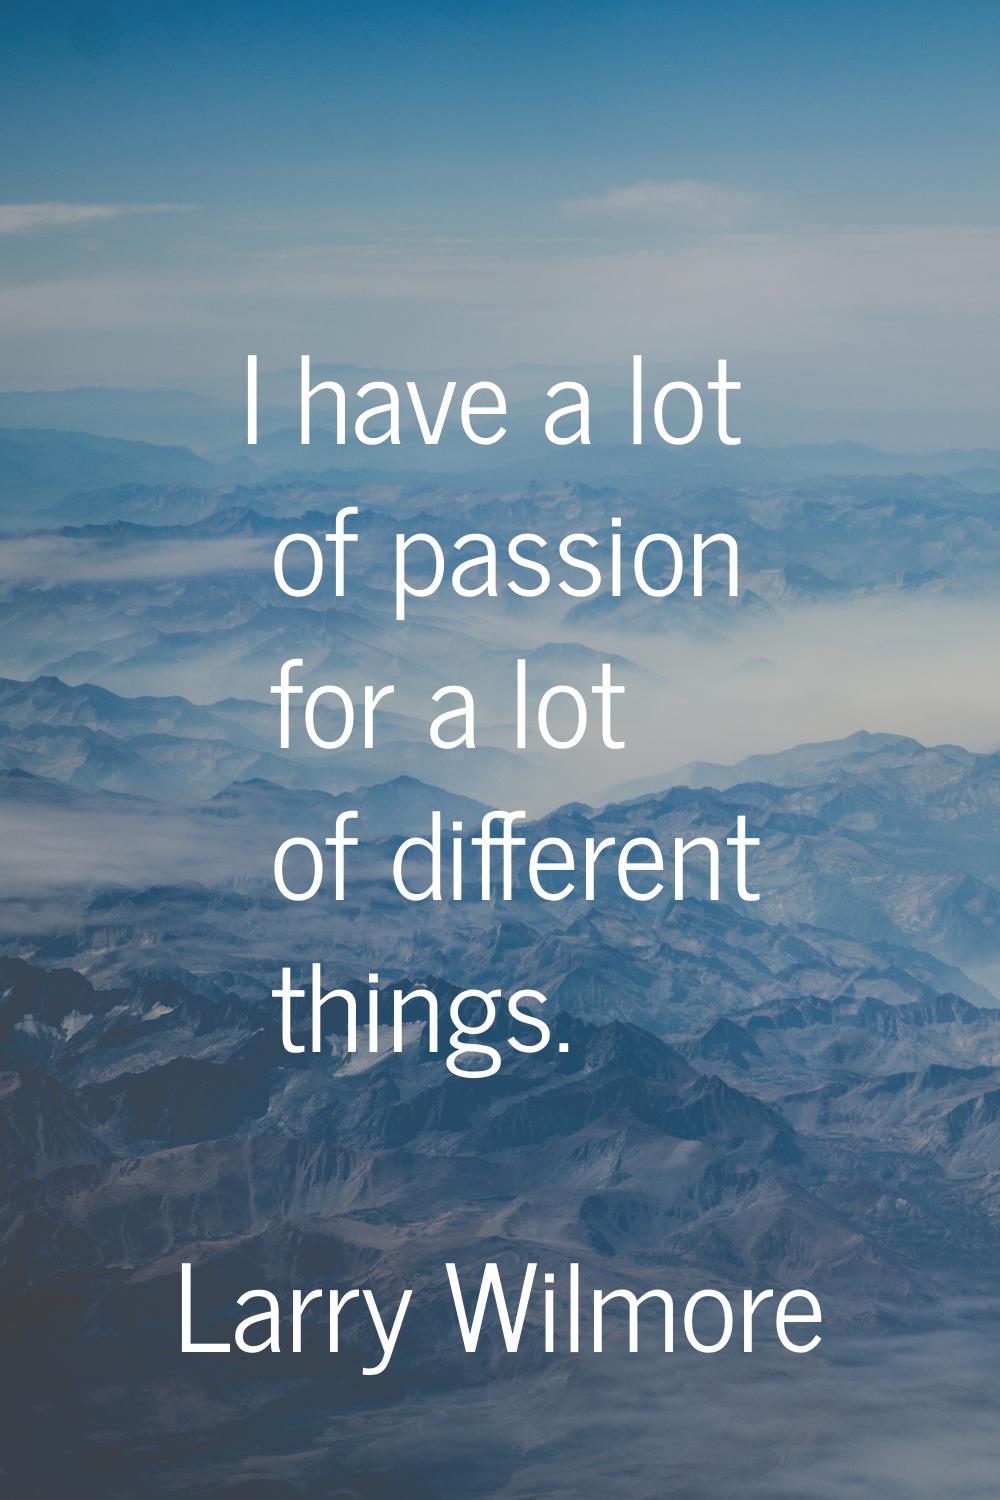 I have a lot of passion for a lot of different things.